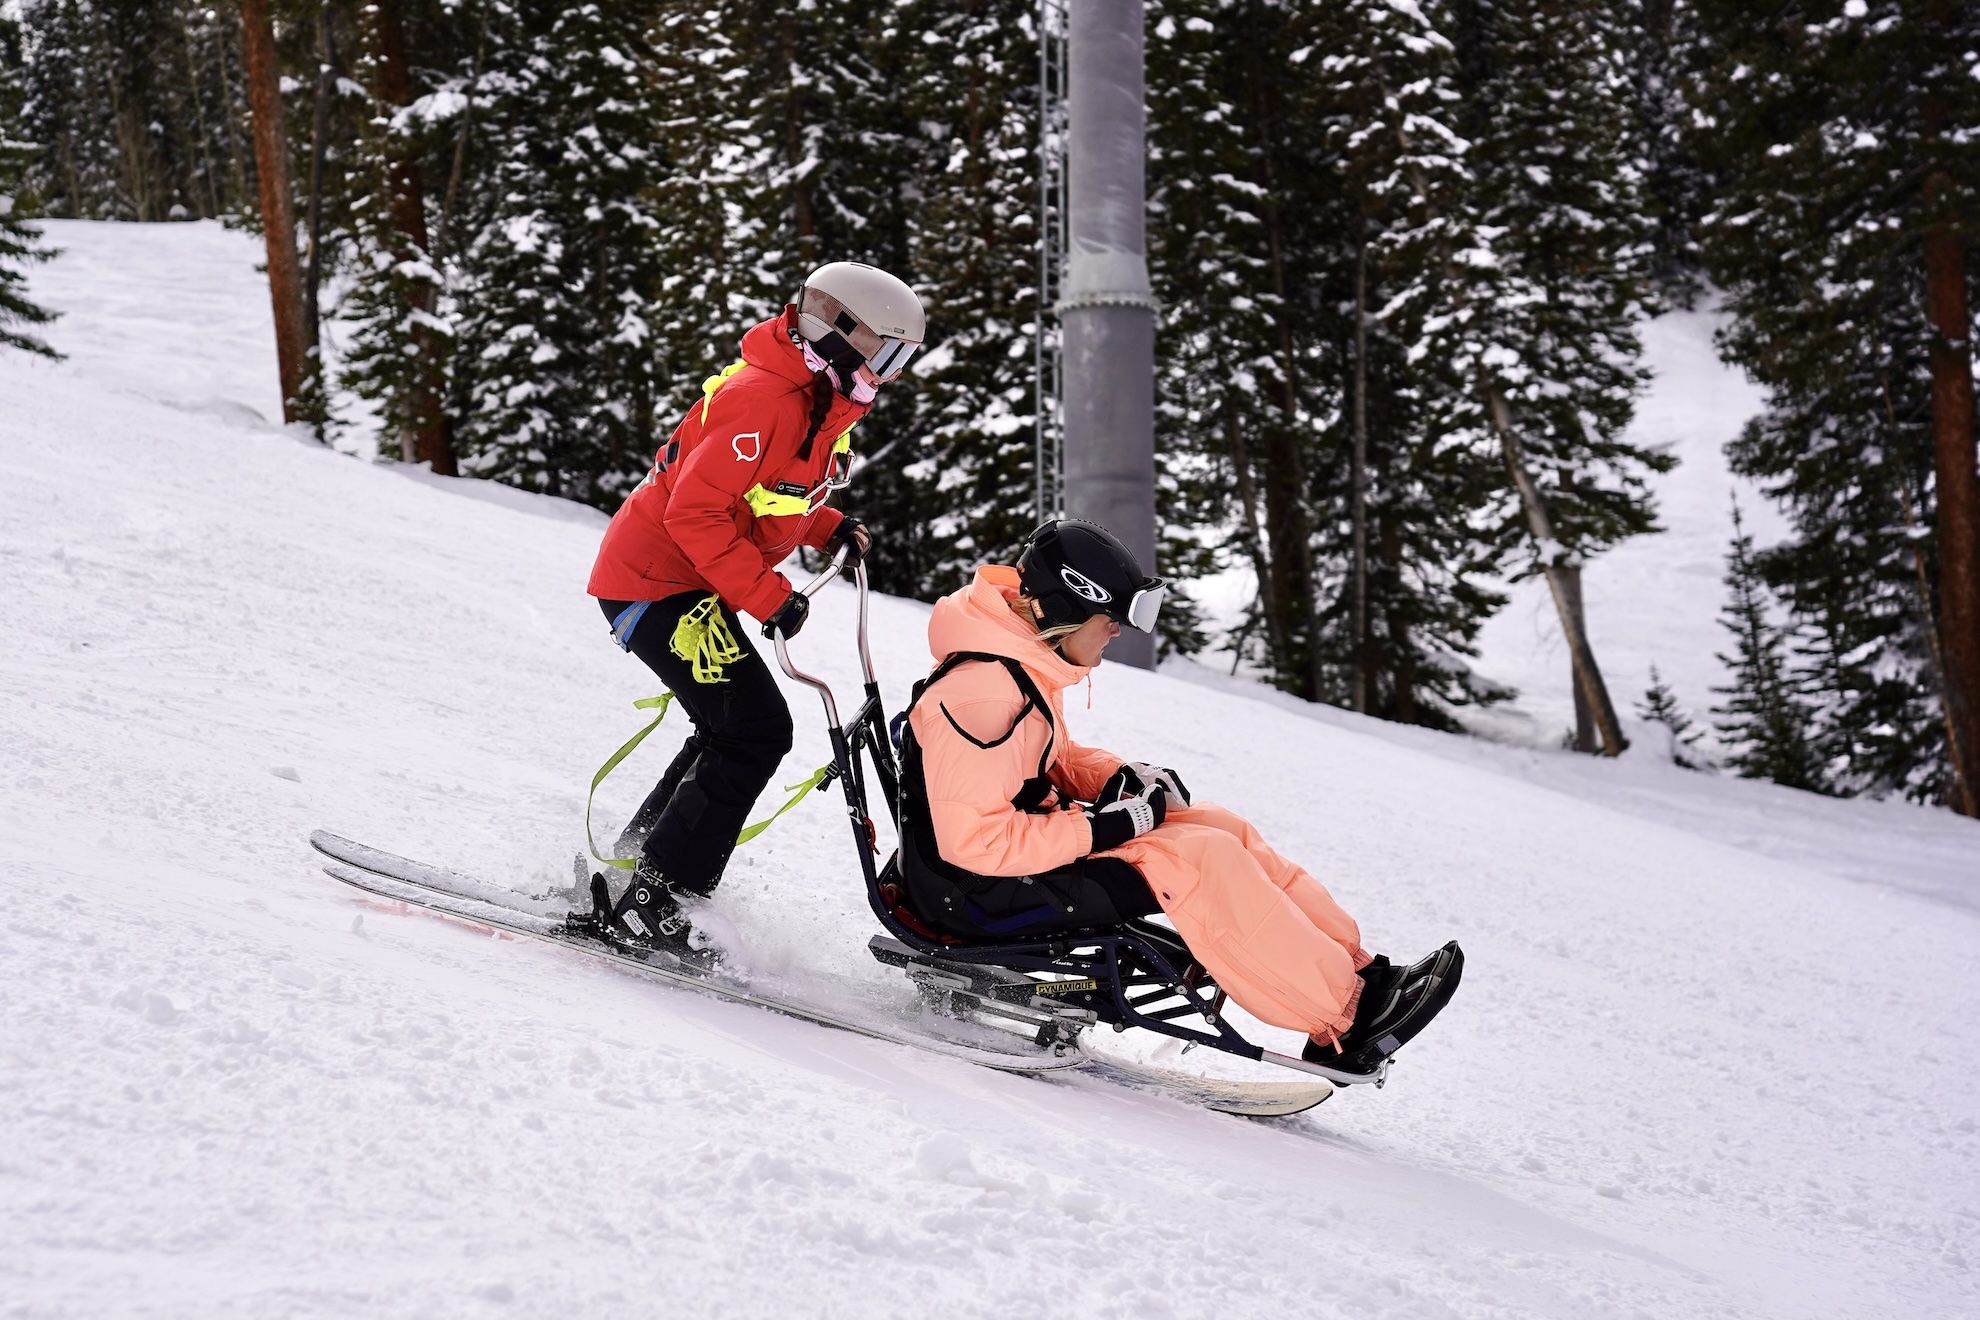 A ski instructor in red bucketing a sitskier down the hill